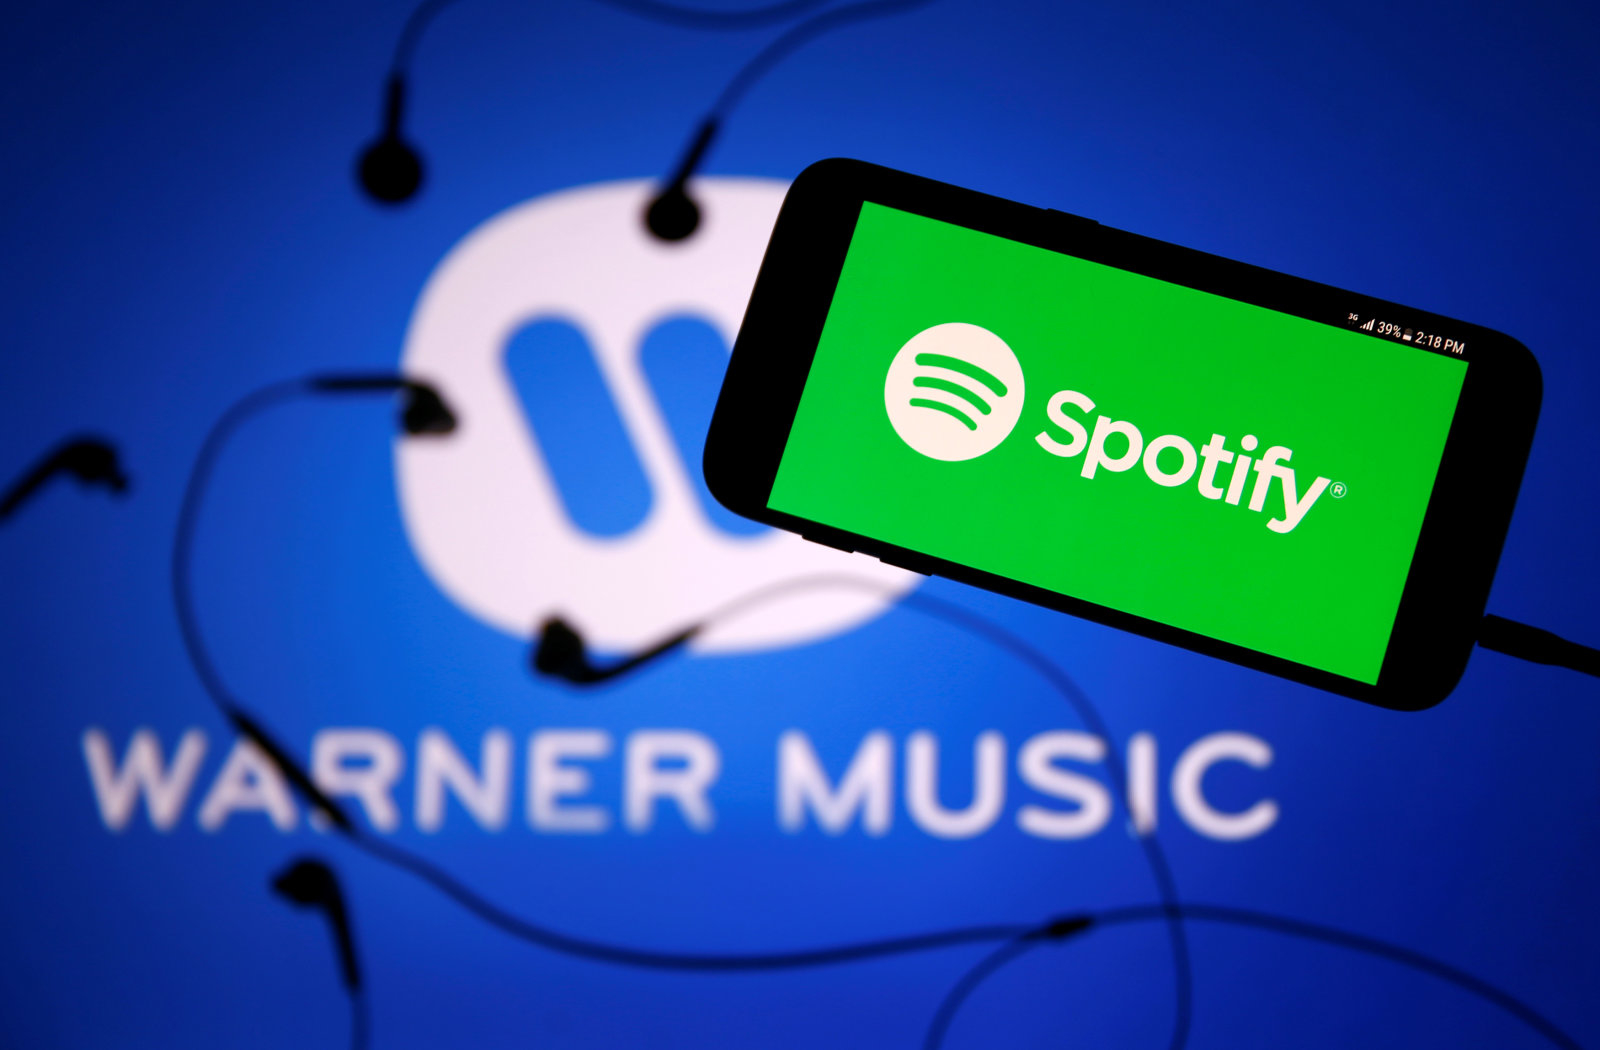 Warner Music just sold all their Spotify stock to give to artists